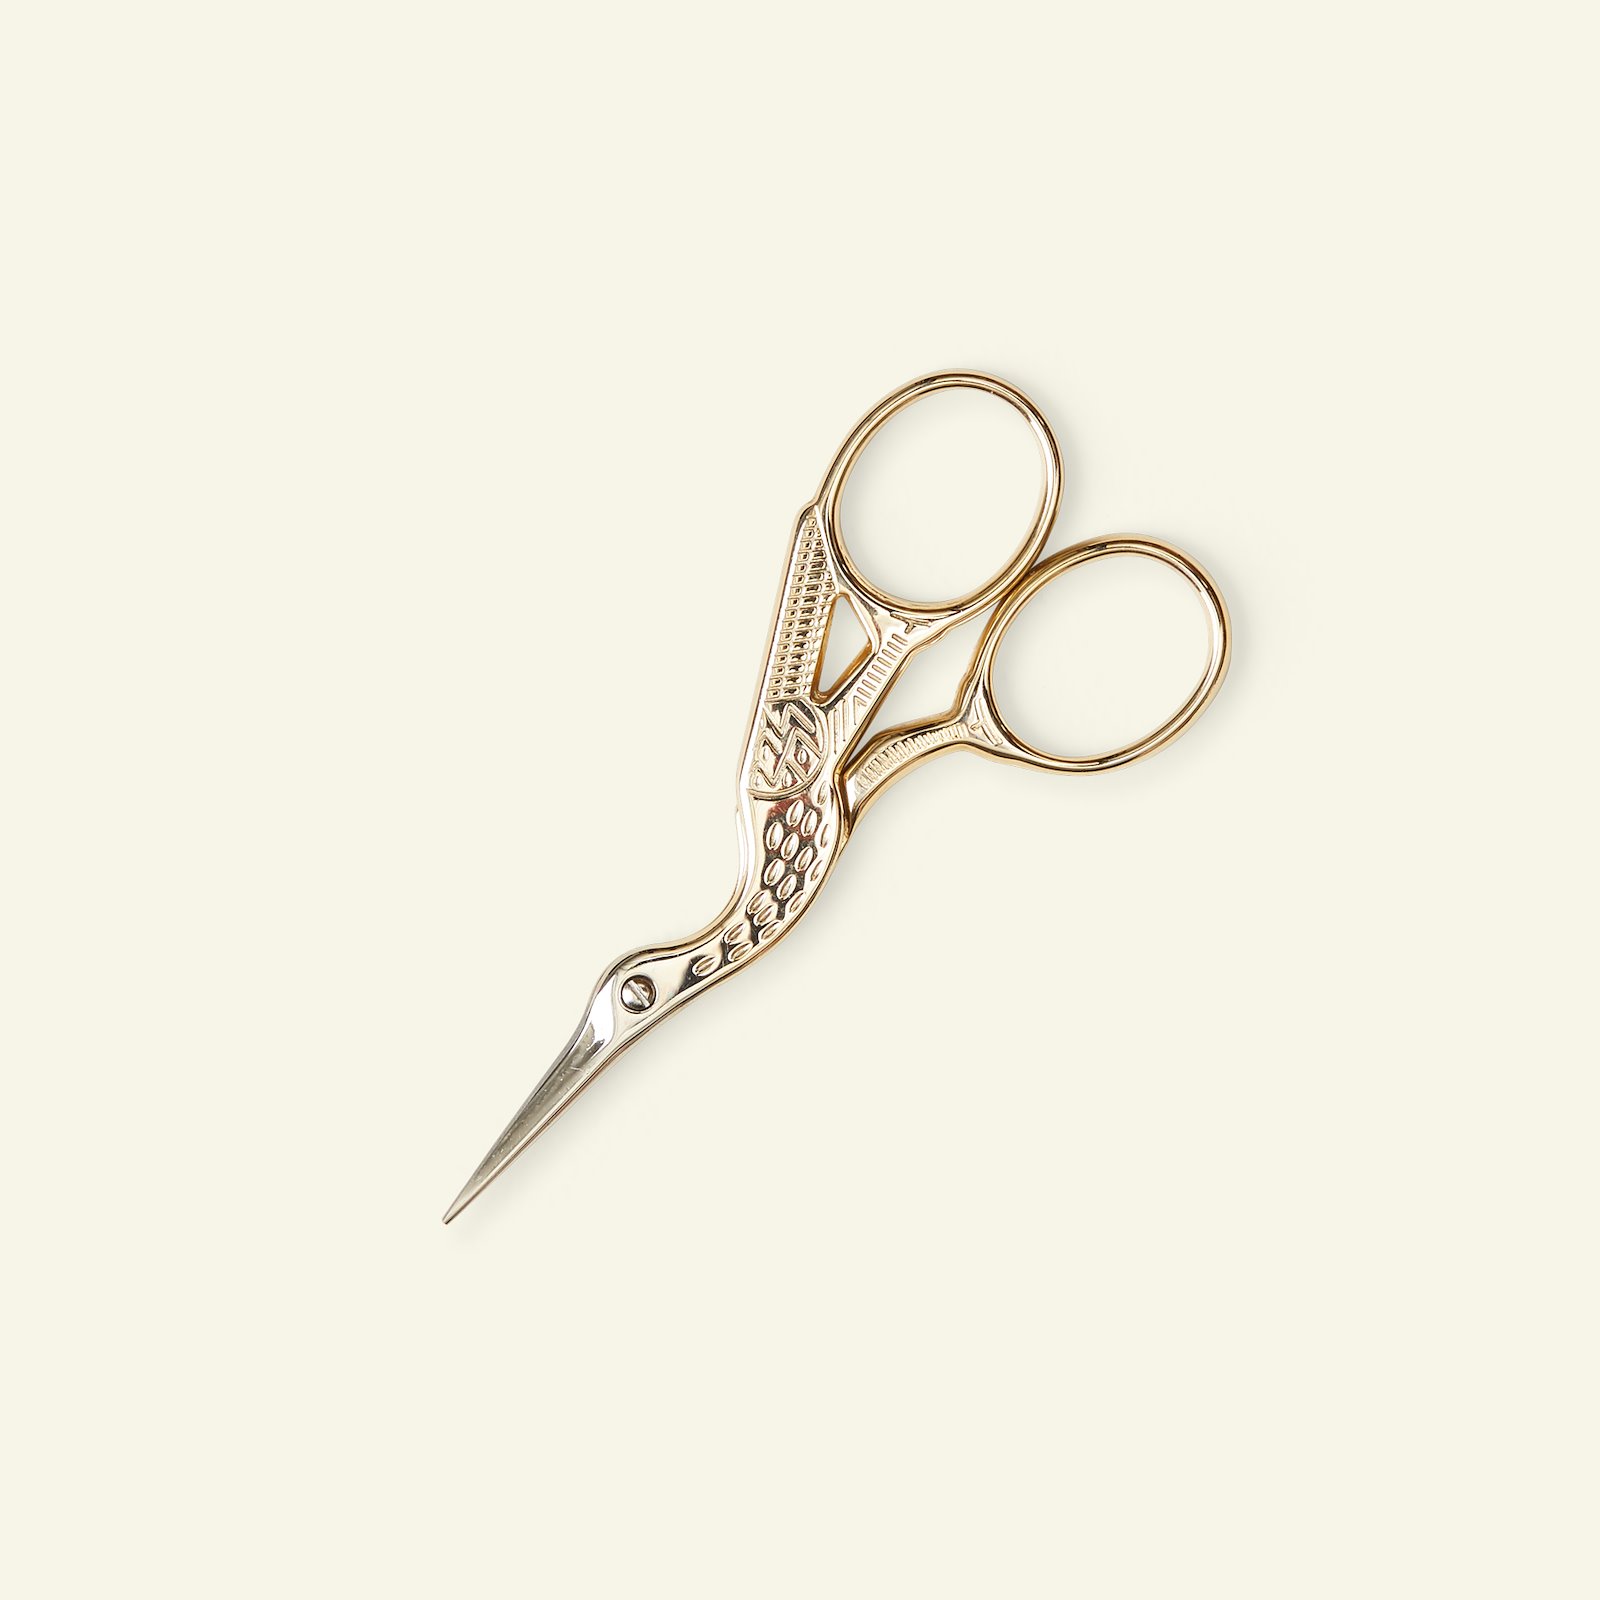 Embroidery scissors stork 9cm gold col. 42012_pack